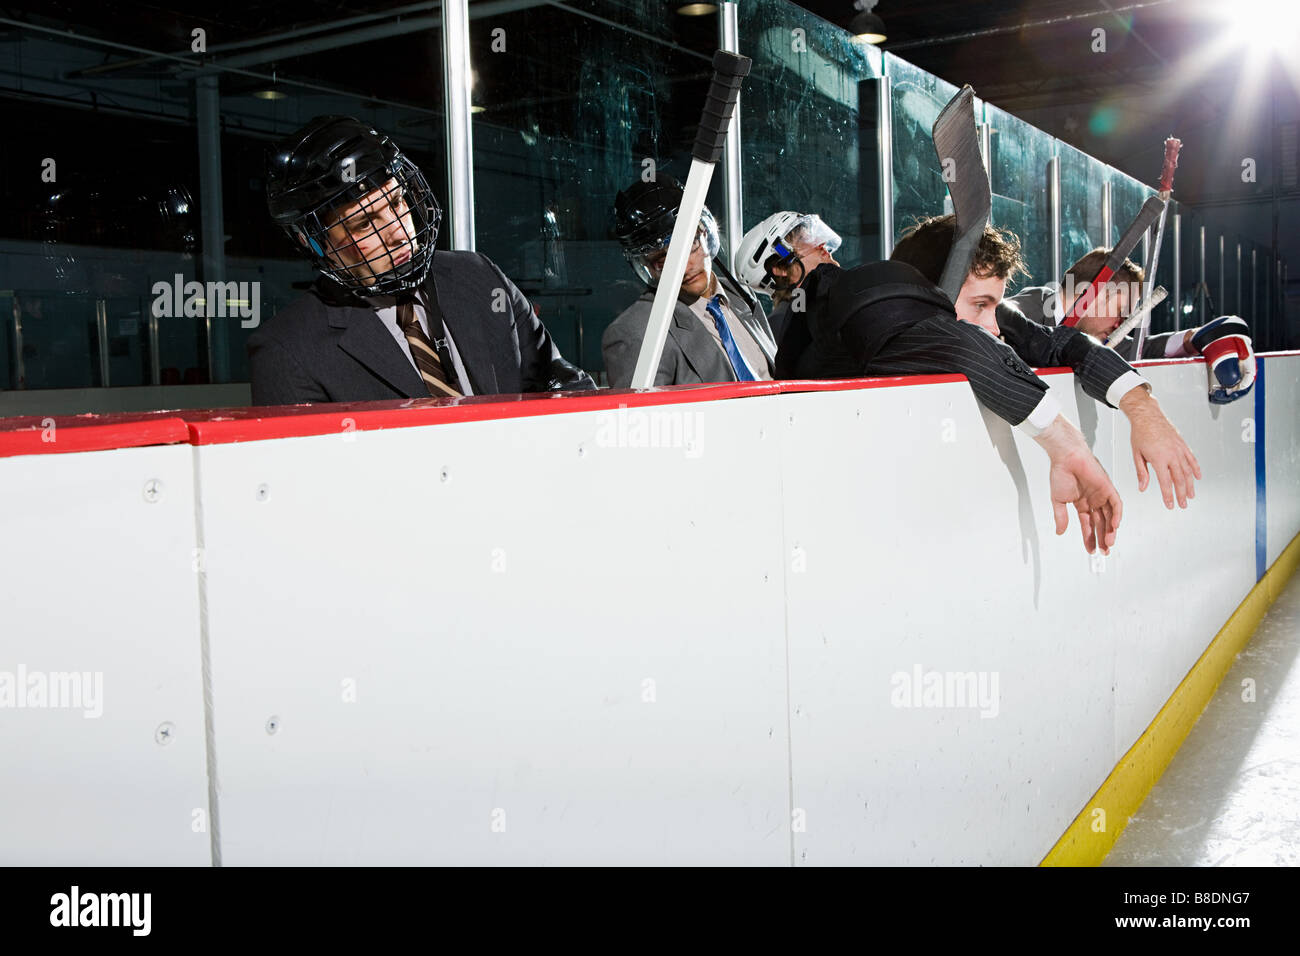 Businessmen at the edge of an ice rink Stock Photo